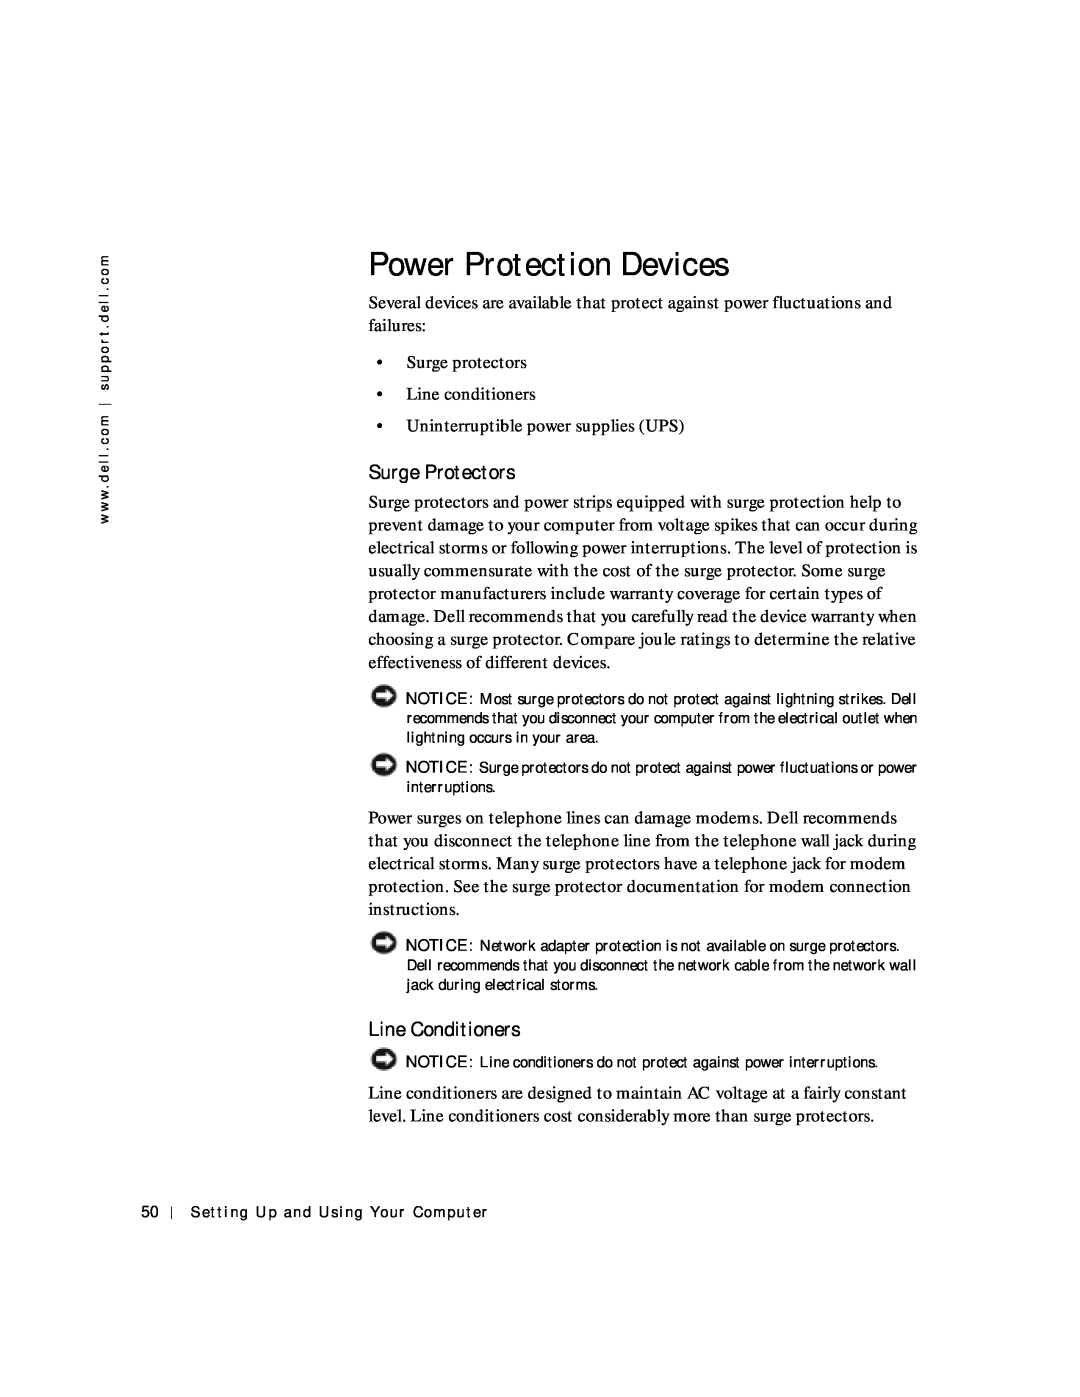 Dell 4150 owner manual Power Protection Devices, Surge Protectors, Line Conditioners 